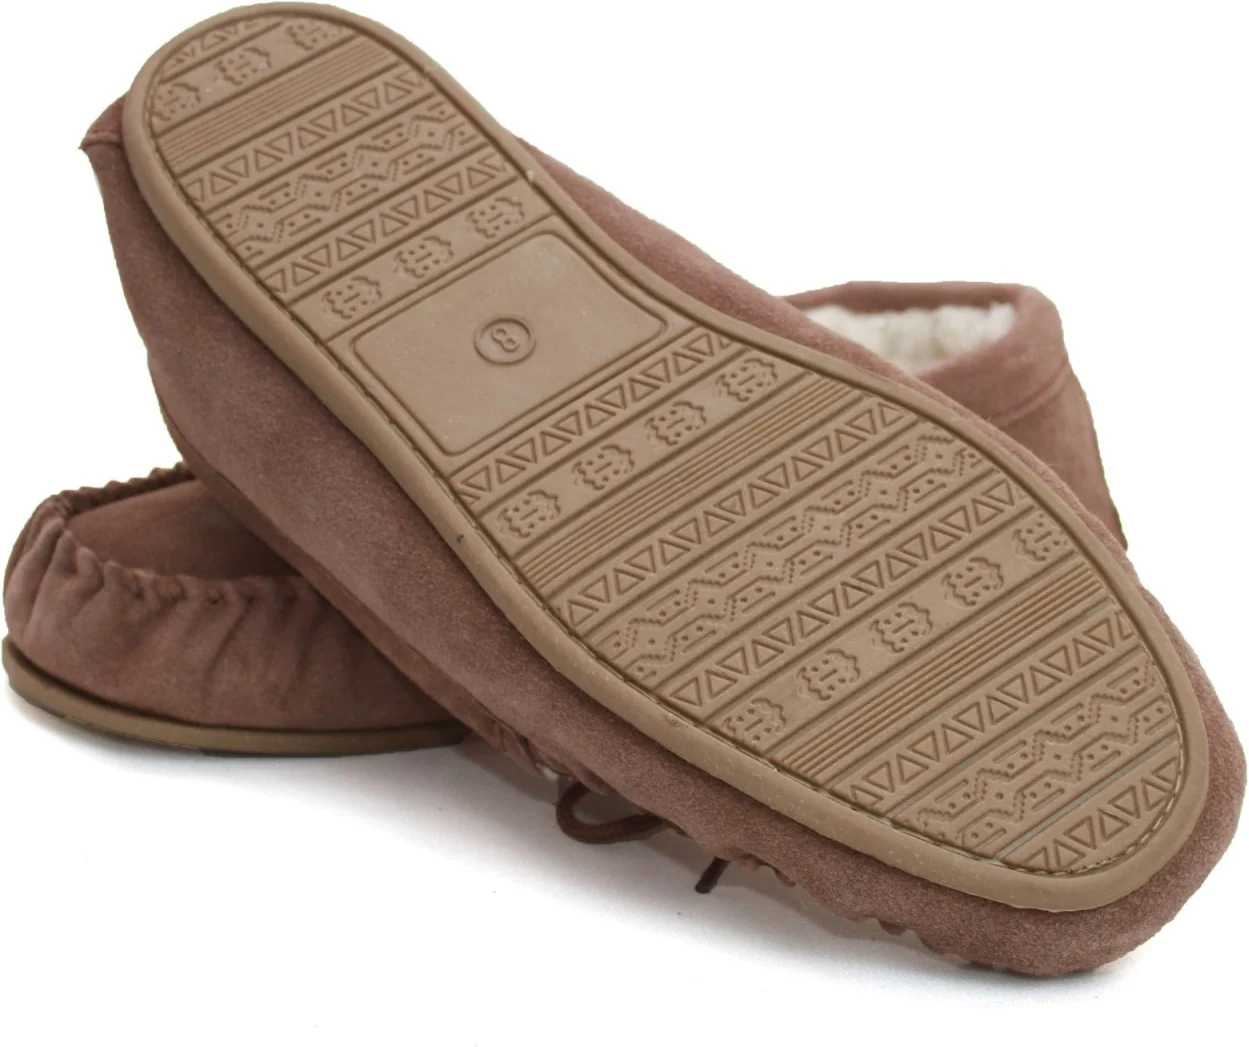 Eastern Counties Leather Moccasins With Hard Sole